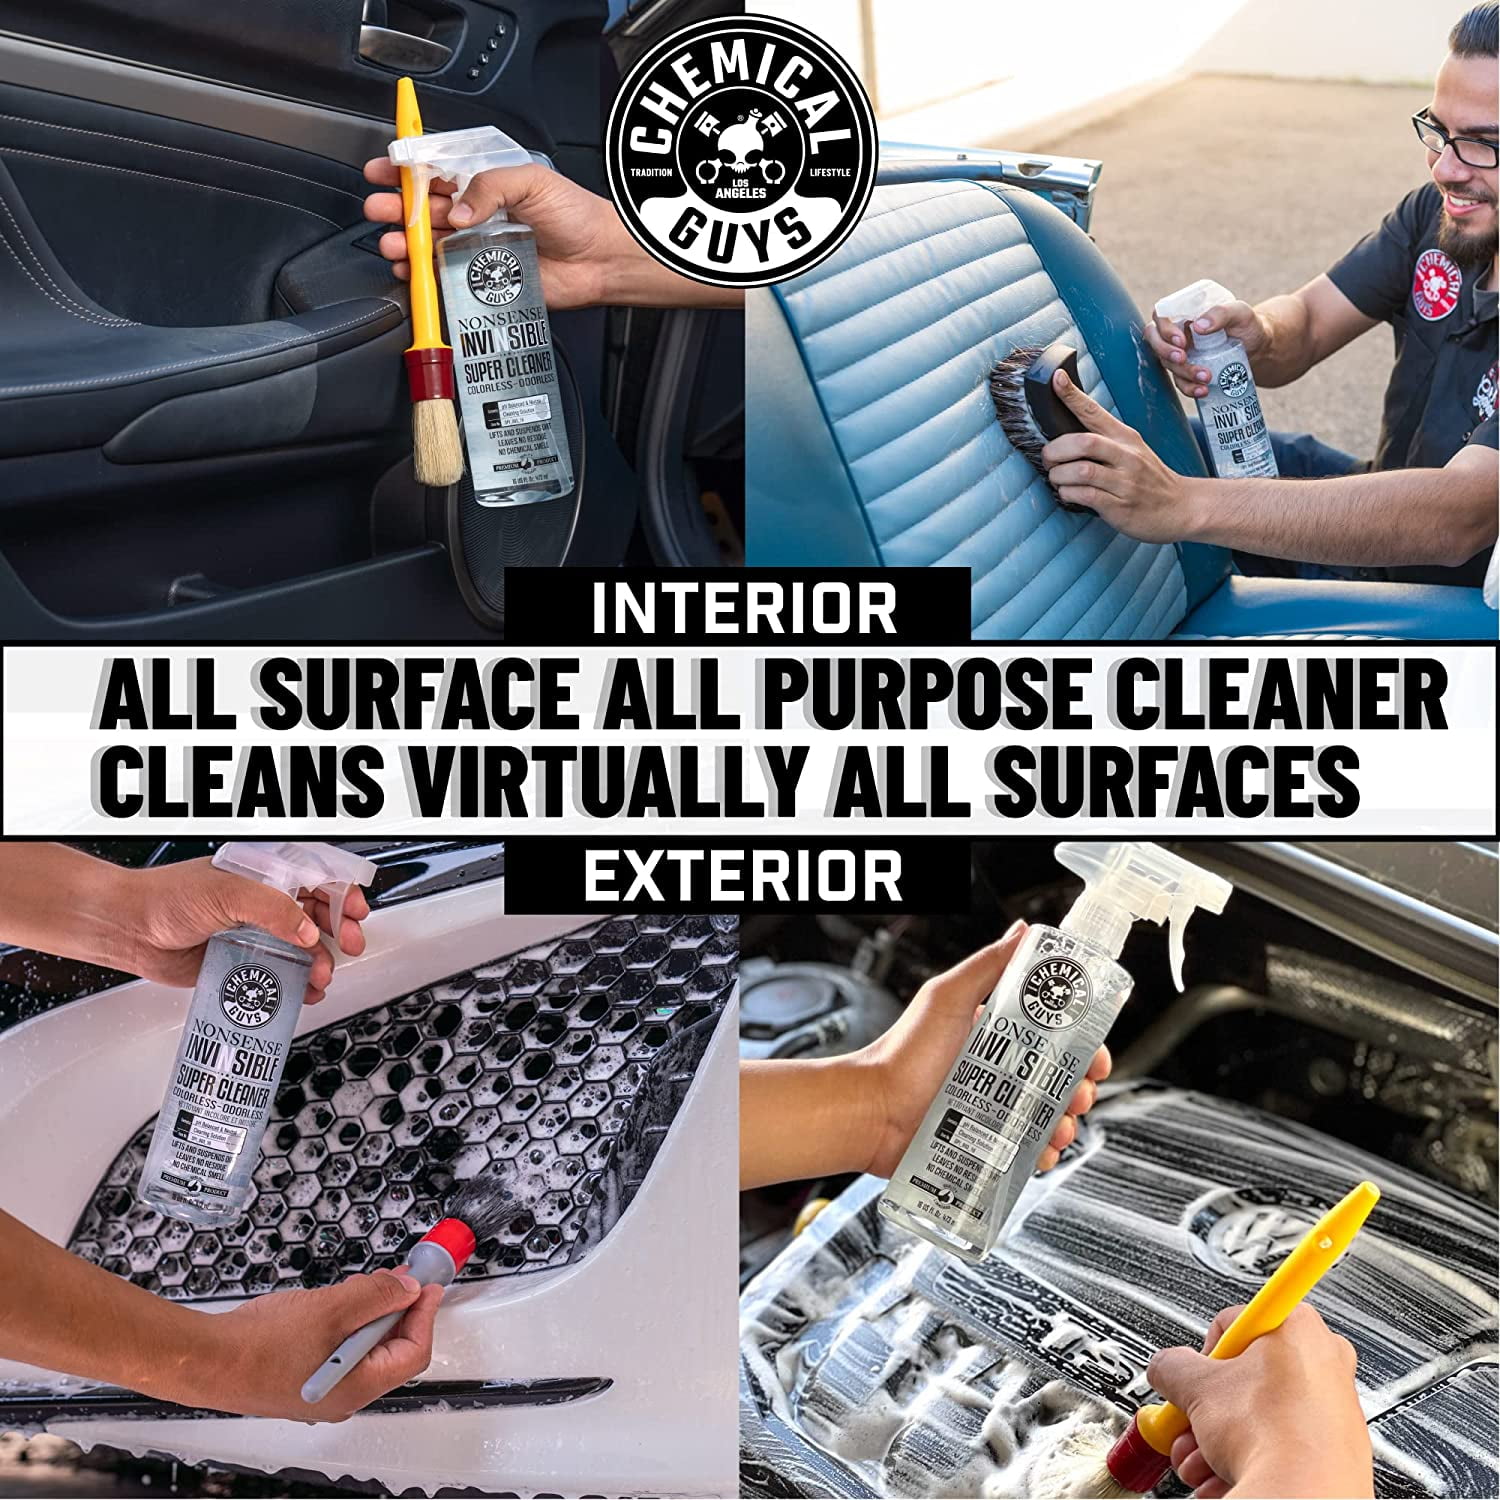 Deep clean your interior with Nonsense All Purpose Cleaner! #ChemicalGuys  💪  Deep clean your interior with 𝗡𝗼𝗻𝘀𝗲𝗻𝘀𝗲 𝗔𝗹𝗹 𝗽𝘂𝗿𝗽𝗼𝘀𝗲  𝗖𝗹𝗲𝗮𝗻𝗲𝗿! #ChemicalGuys 💪 Nonsense is the colorless, odorless, and  all-purpose super 